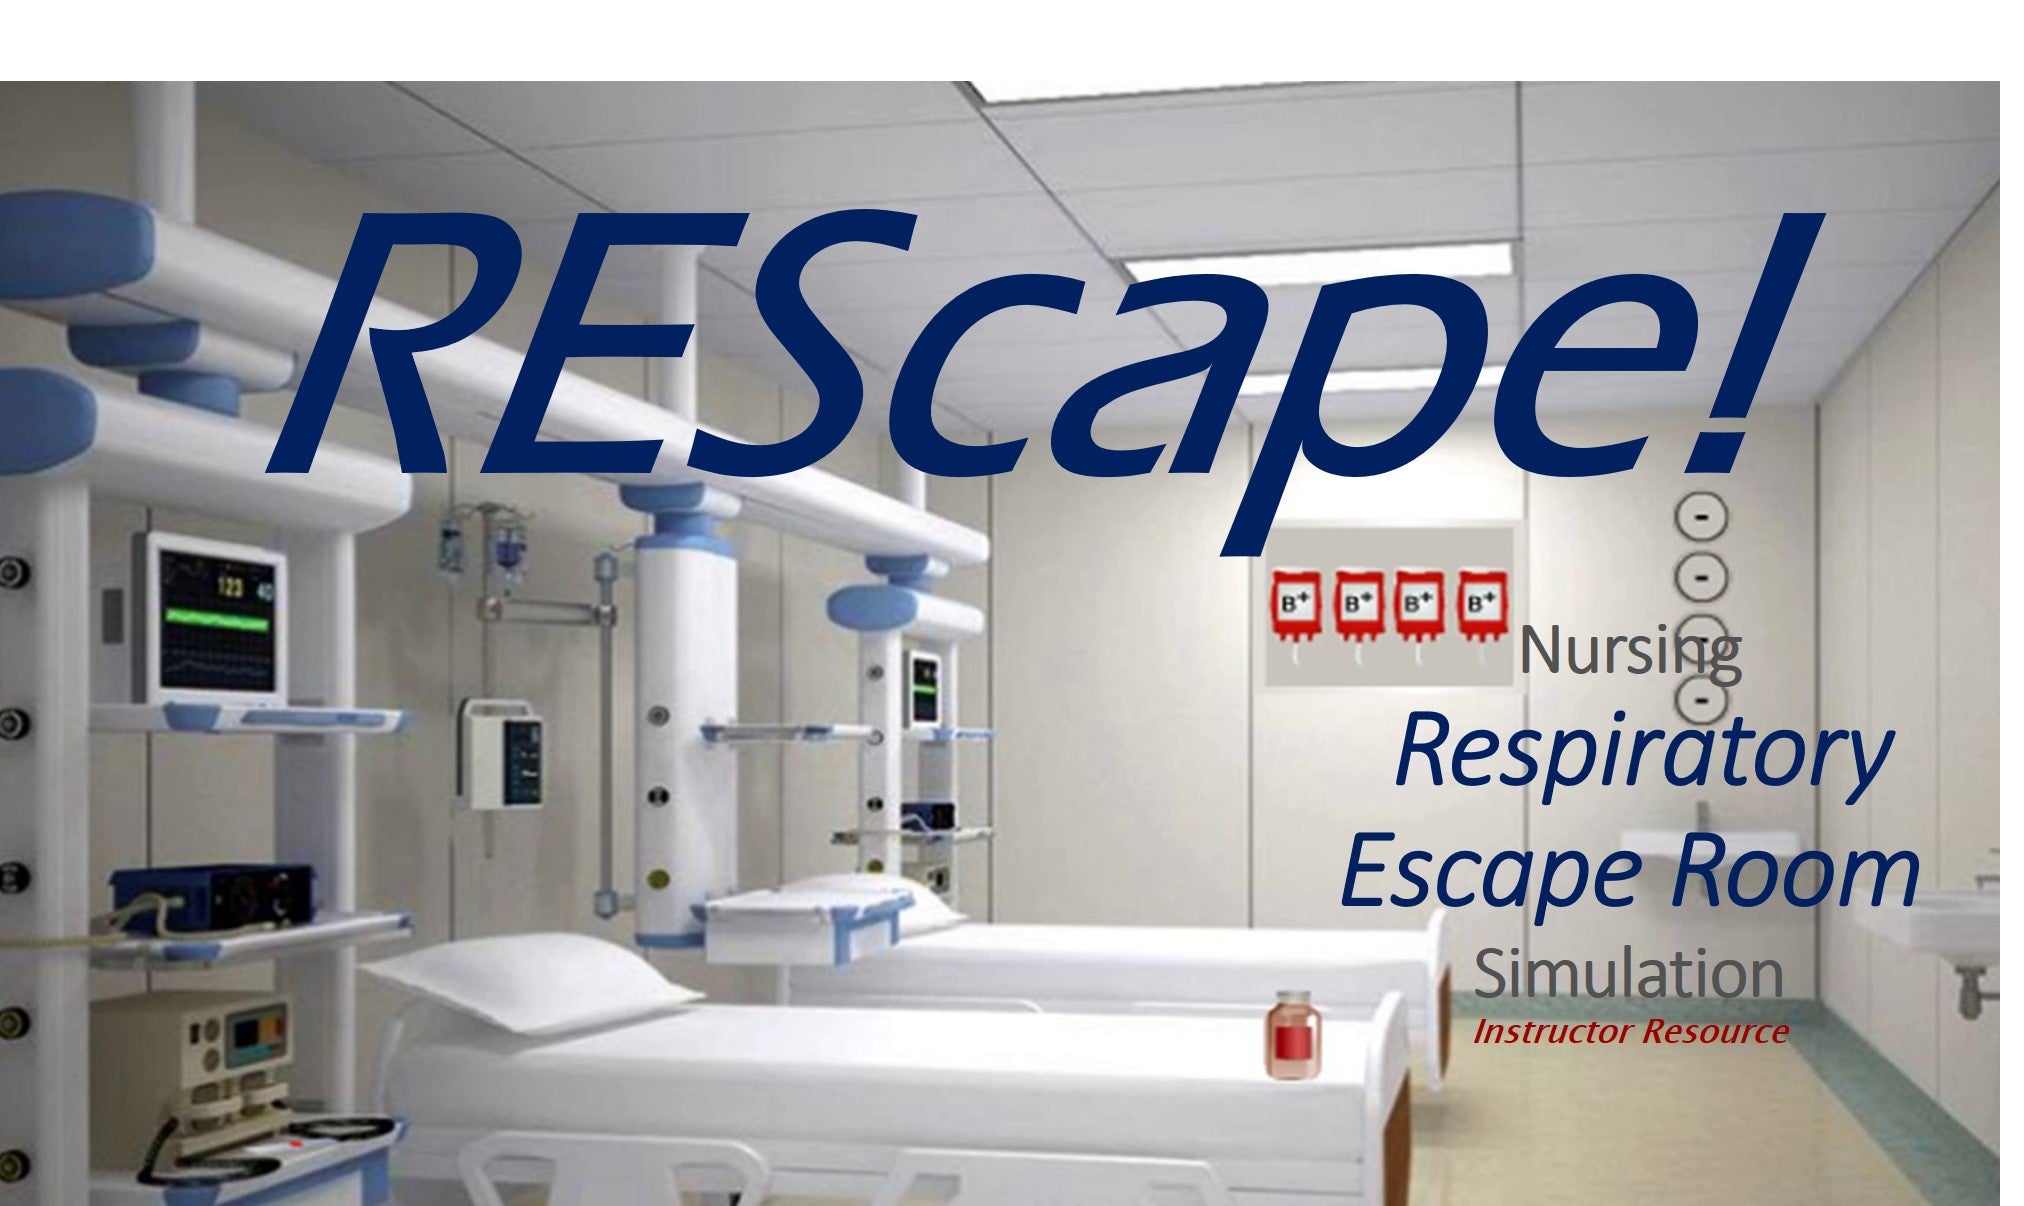 NEW! REScape - Nursing Respiratory Escape Room - COPD with Bacterial Infection